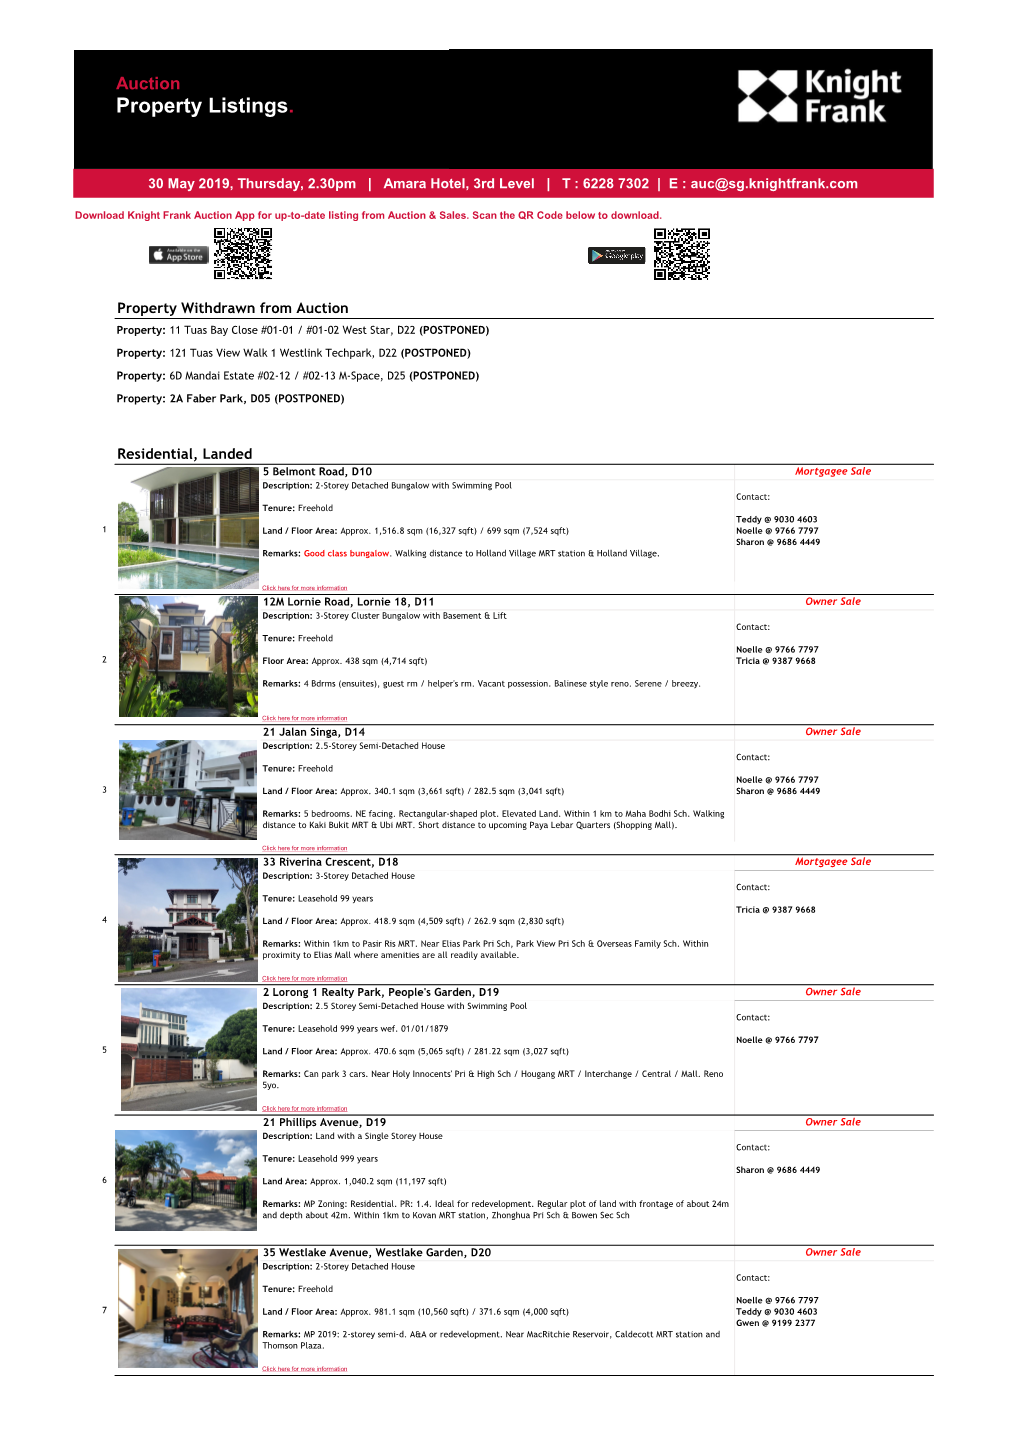 Auction Property Listings